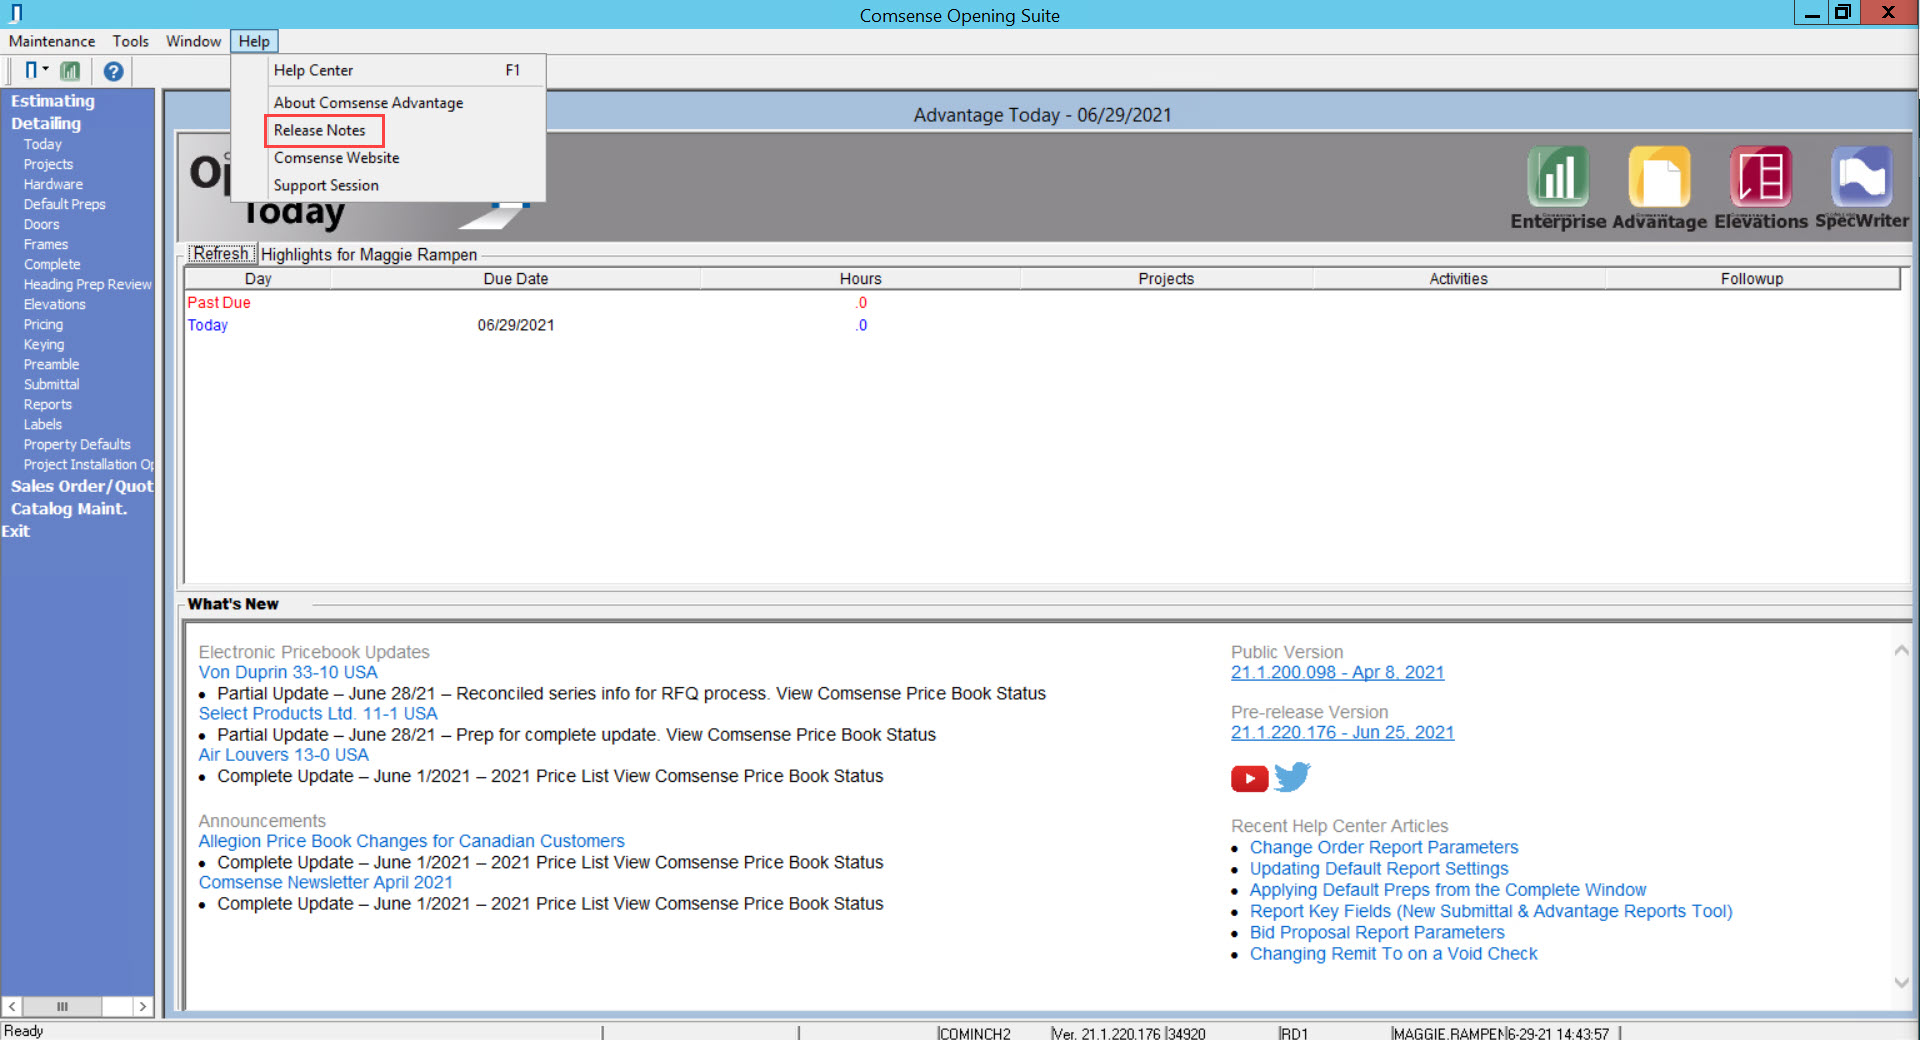 Comsense Advantage; shows the pathway to open the Release Notes window.